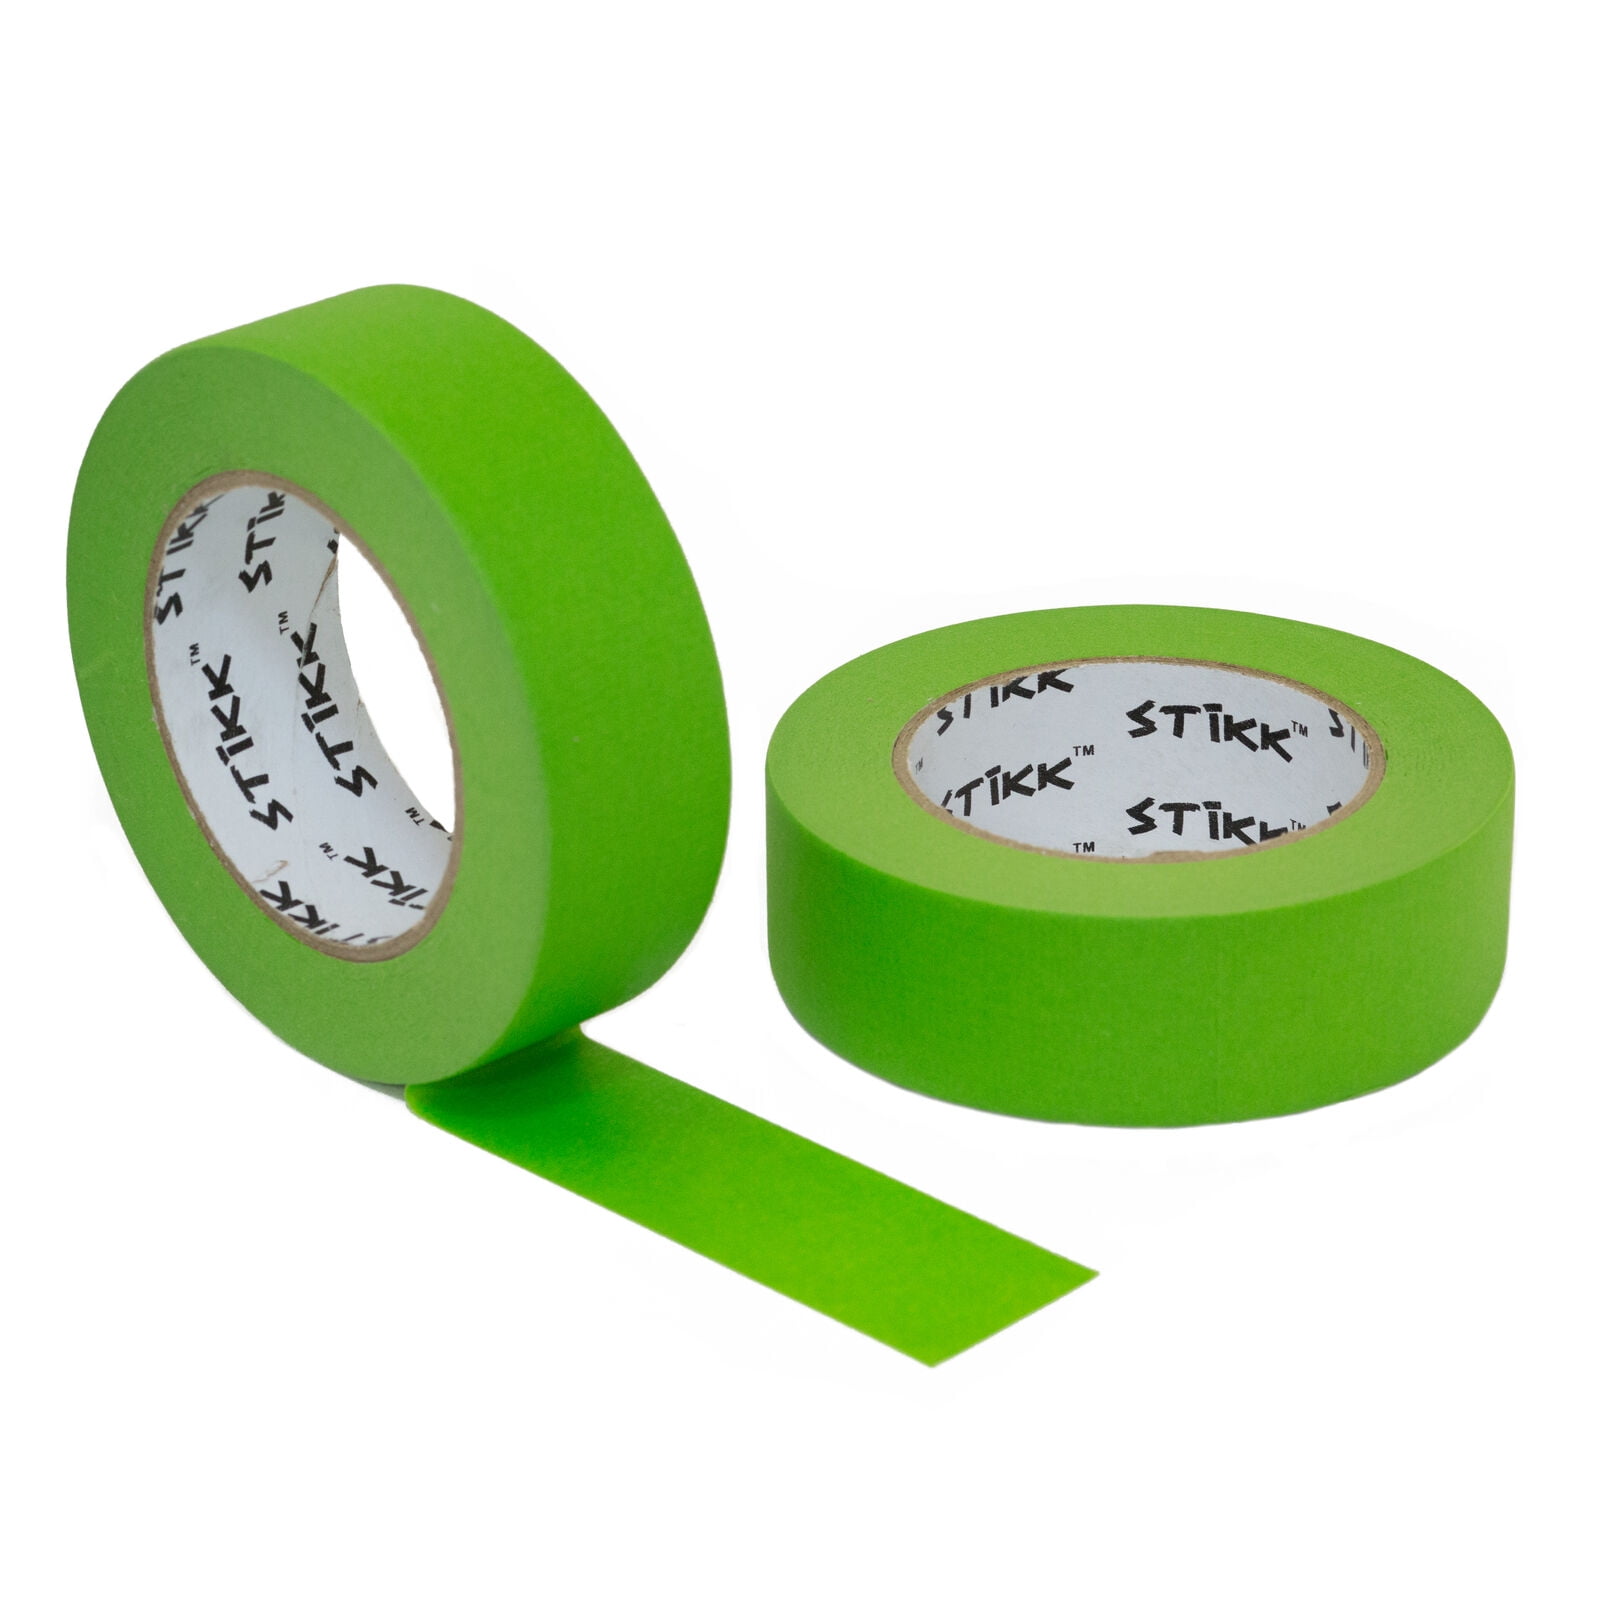 Scotch 2060-2A Masking Tape for Hard-to-Stick Surfaces 1.88-Inch by 1 2060-48A 